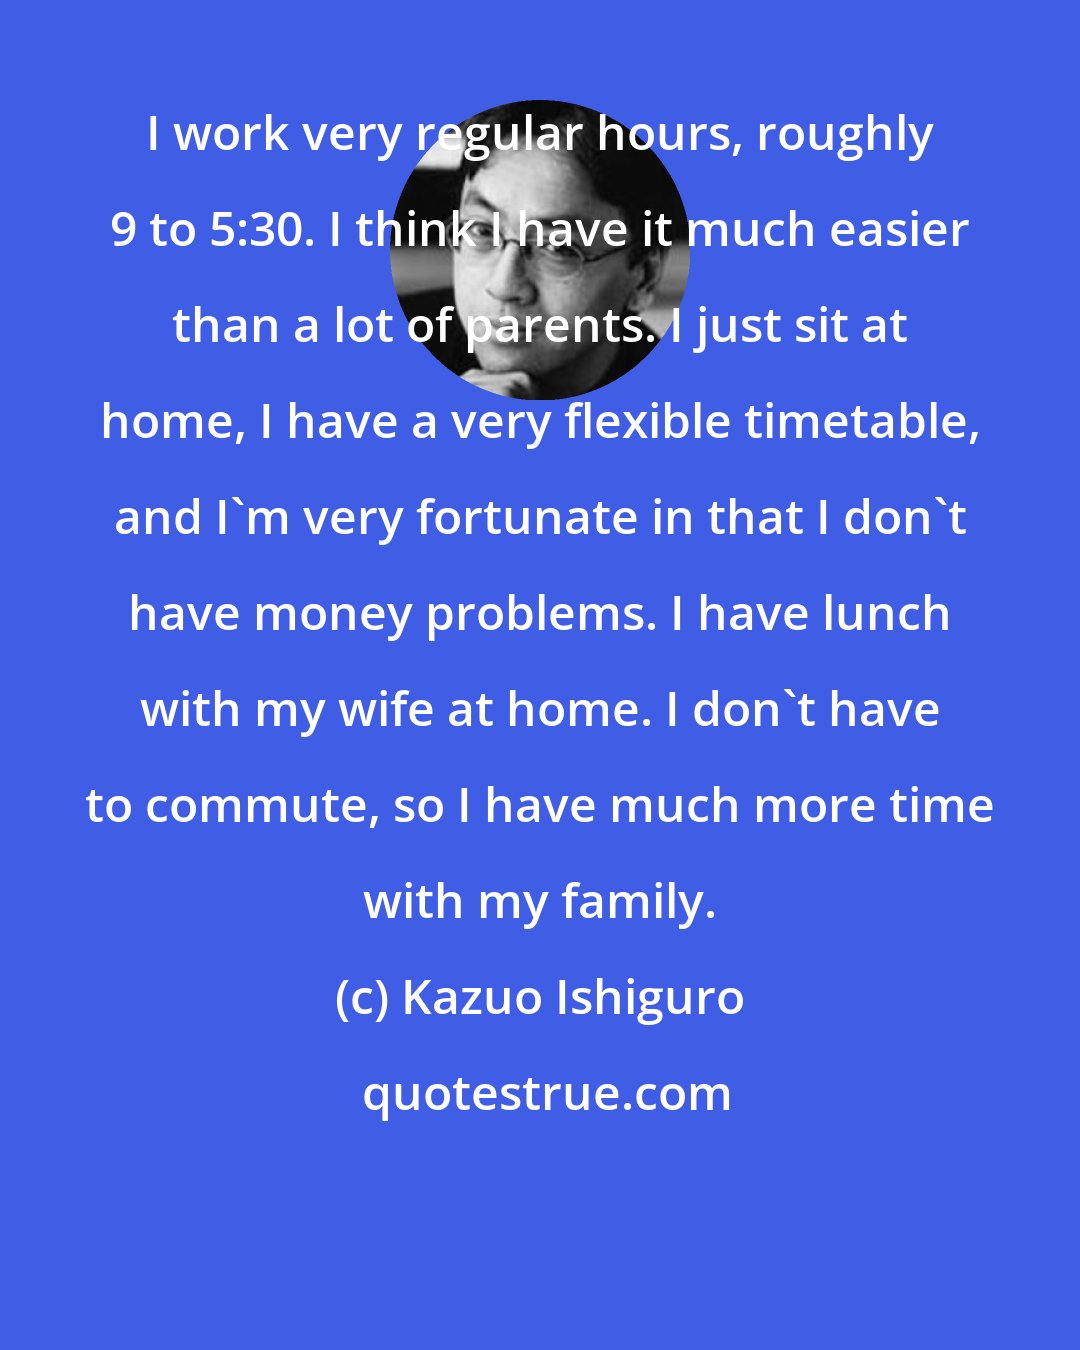 Kazuo Ishiguro: I work very regular hours, roughly 9 to 5:30. I think I have it much easier than a lot of parents. I just sit at home, I have a very flexible timetable, and I'm very fortunate in that I don't have money problems. I have lunch with my wife at home. I don't have to commute, so I have much more time with my family.